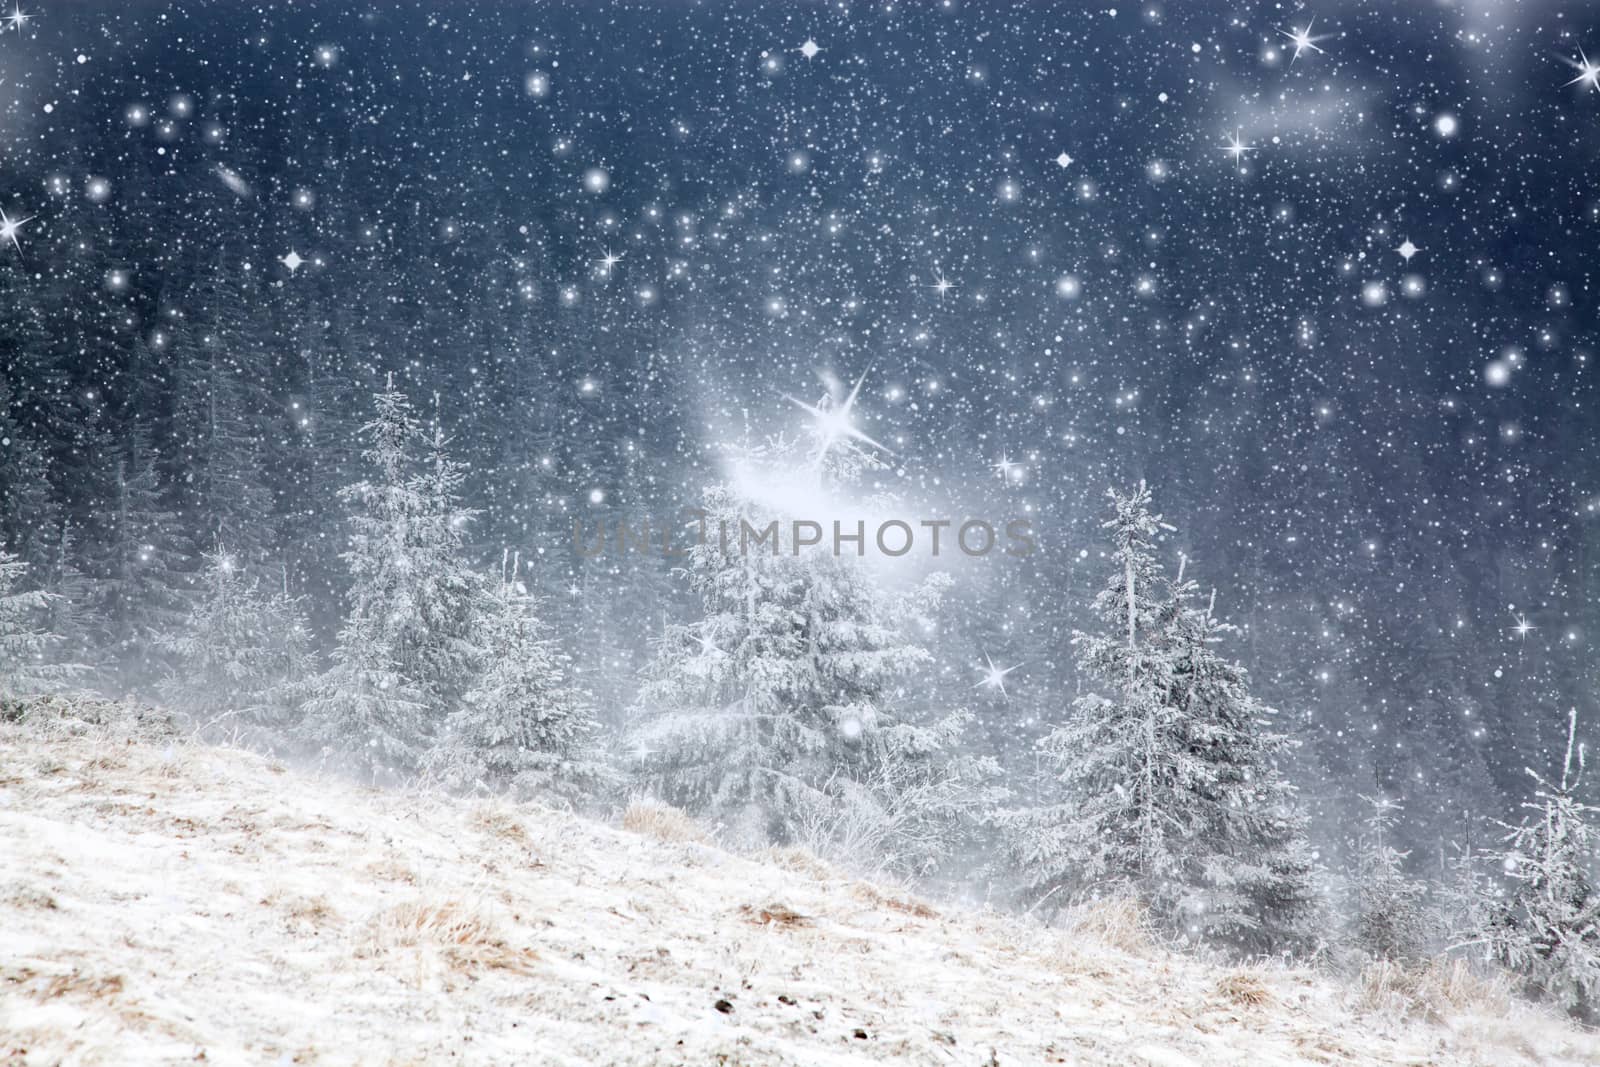 winter landscape with snowy fir trees in the mountains by melis